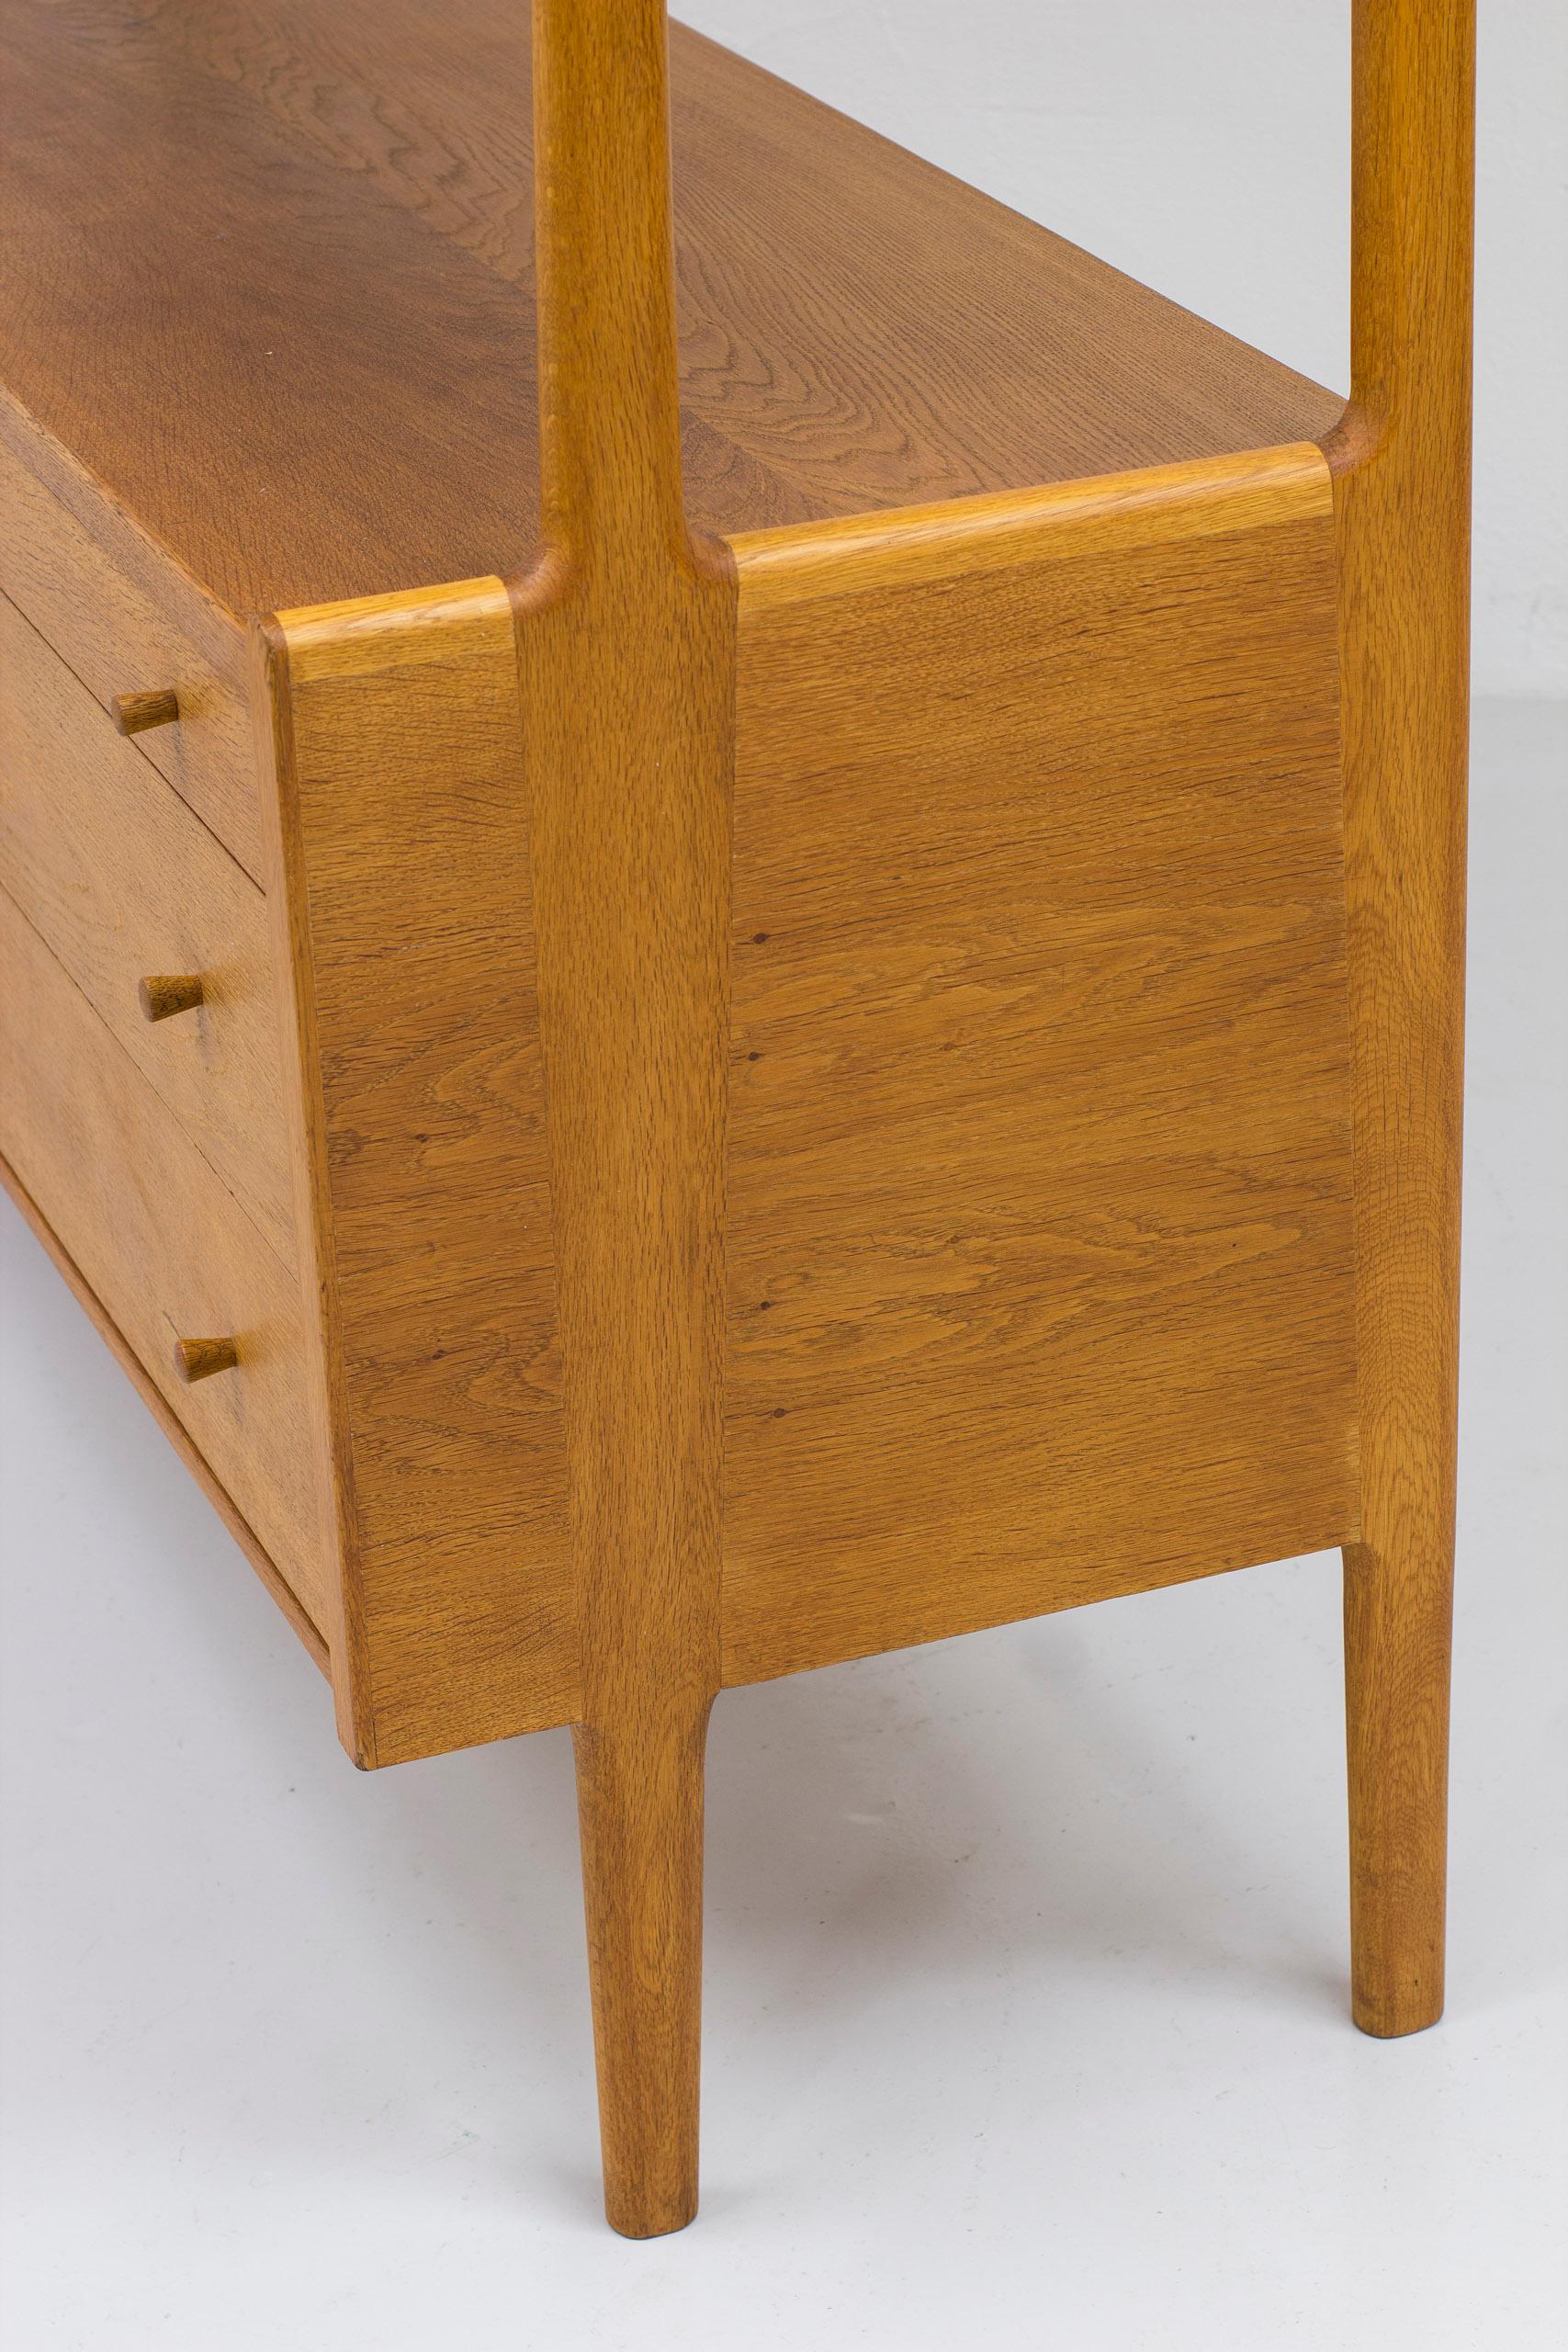 Oak and cane sideboard RY20 by Hans J. Wegner, RY Møbler, 1950s For Sale 1